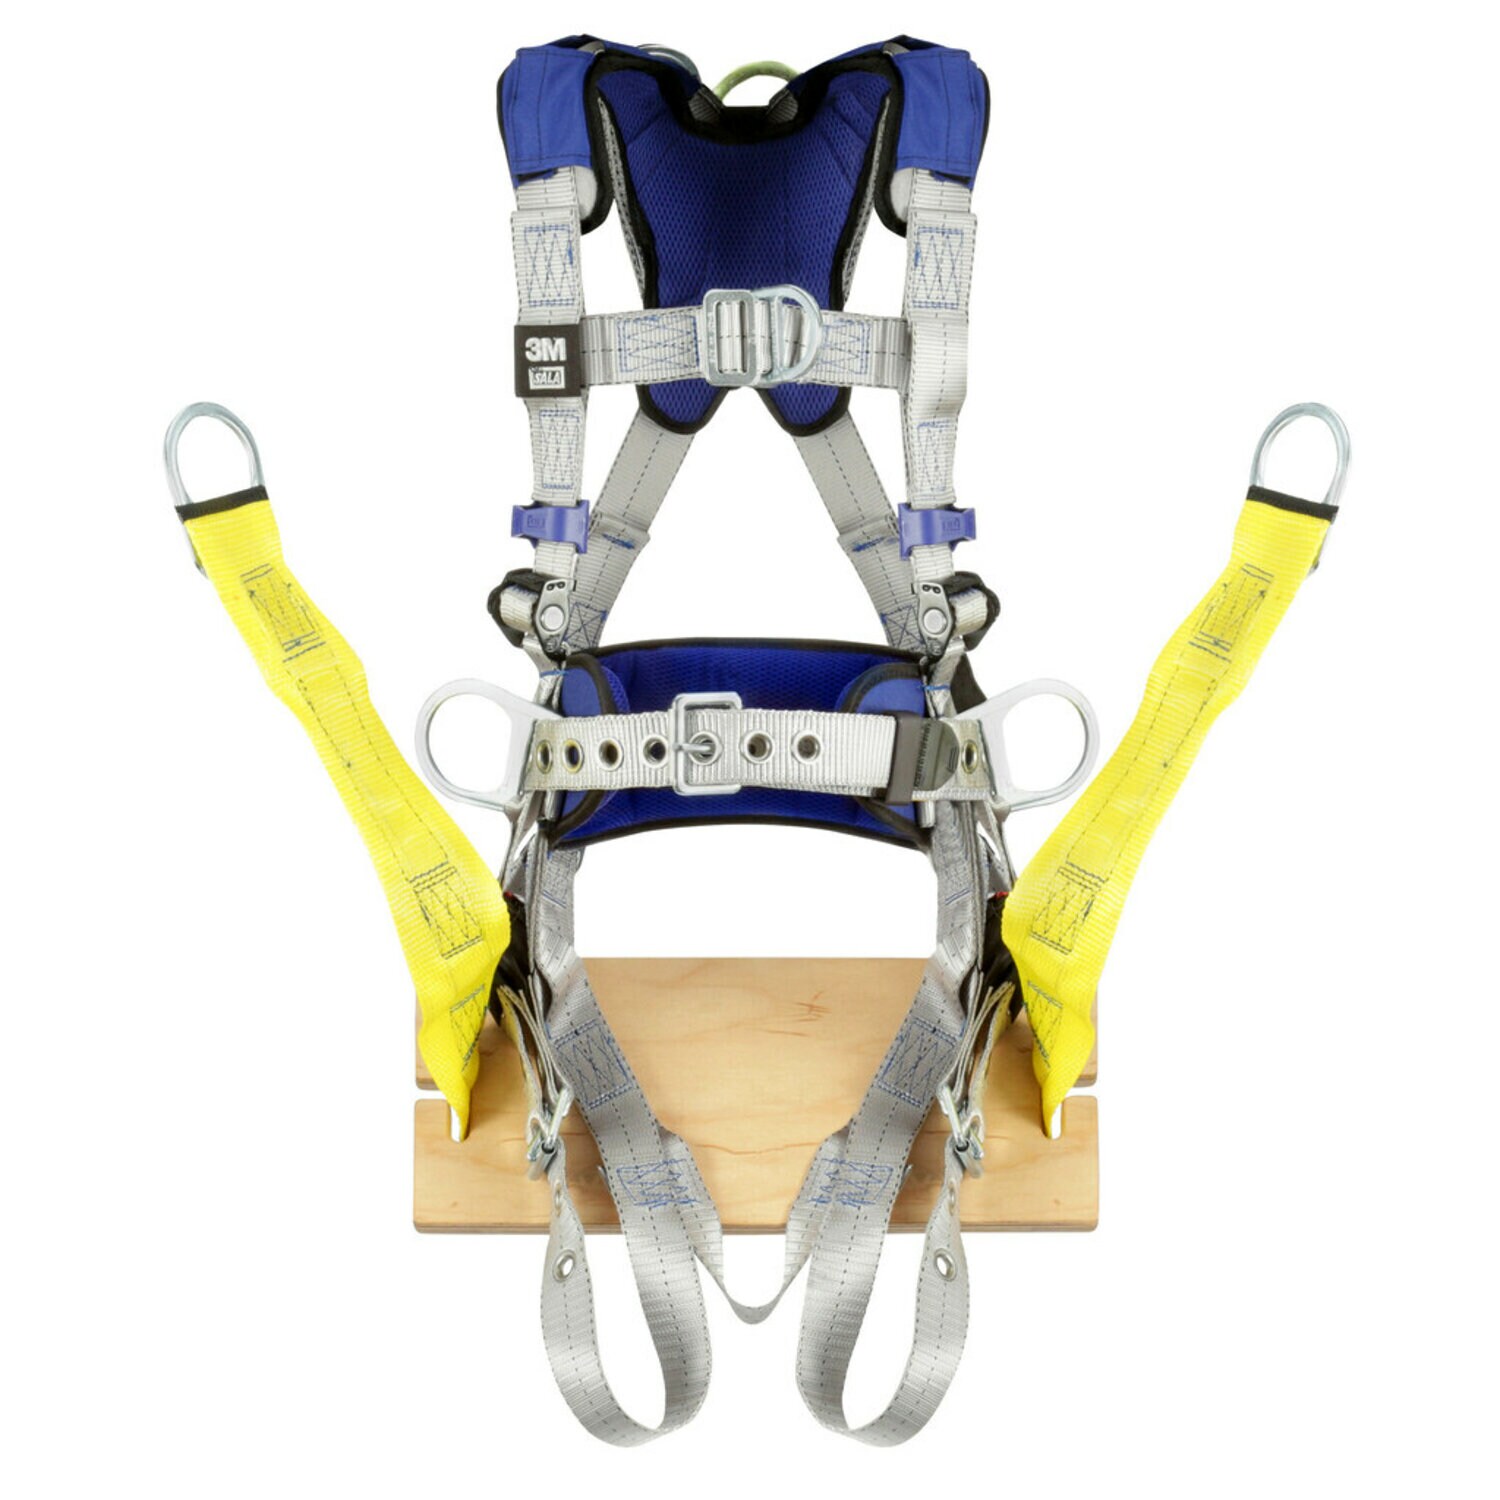 7012817627 - 3M DBI-SALA ExoFit X100 Comfort Construction Oil and Gas Climbing/Positioning/Suspension Safety Harness 1401145, Small